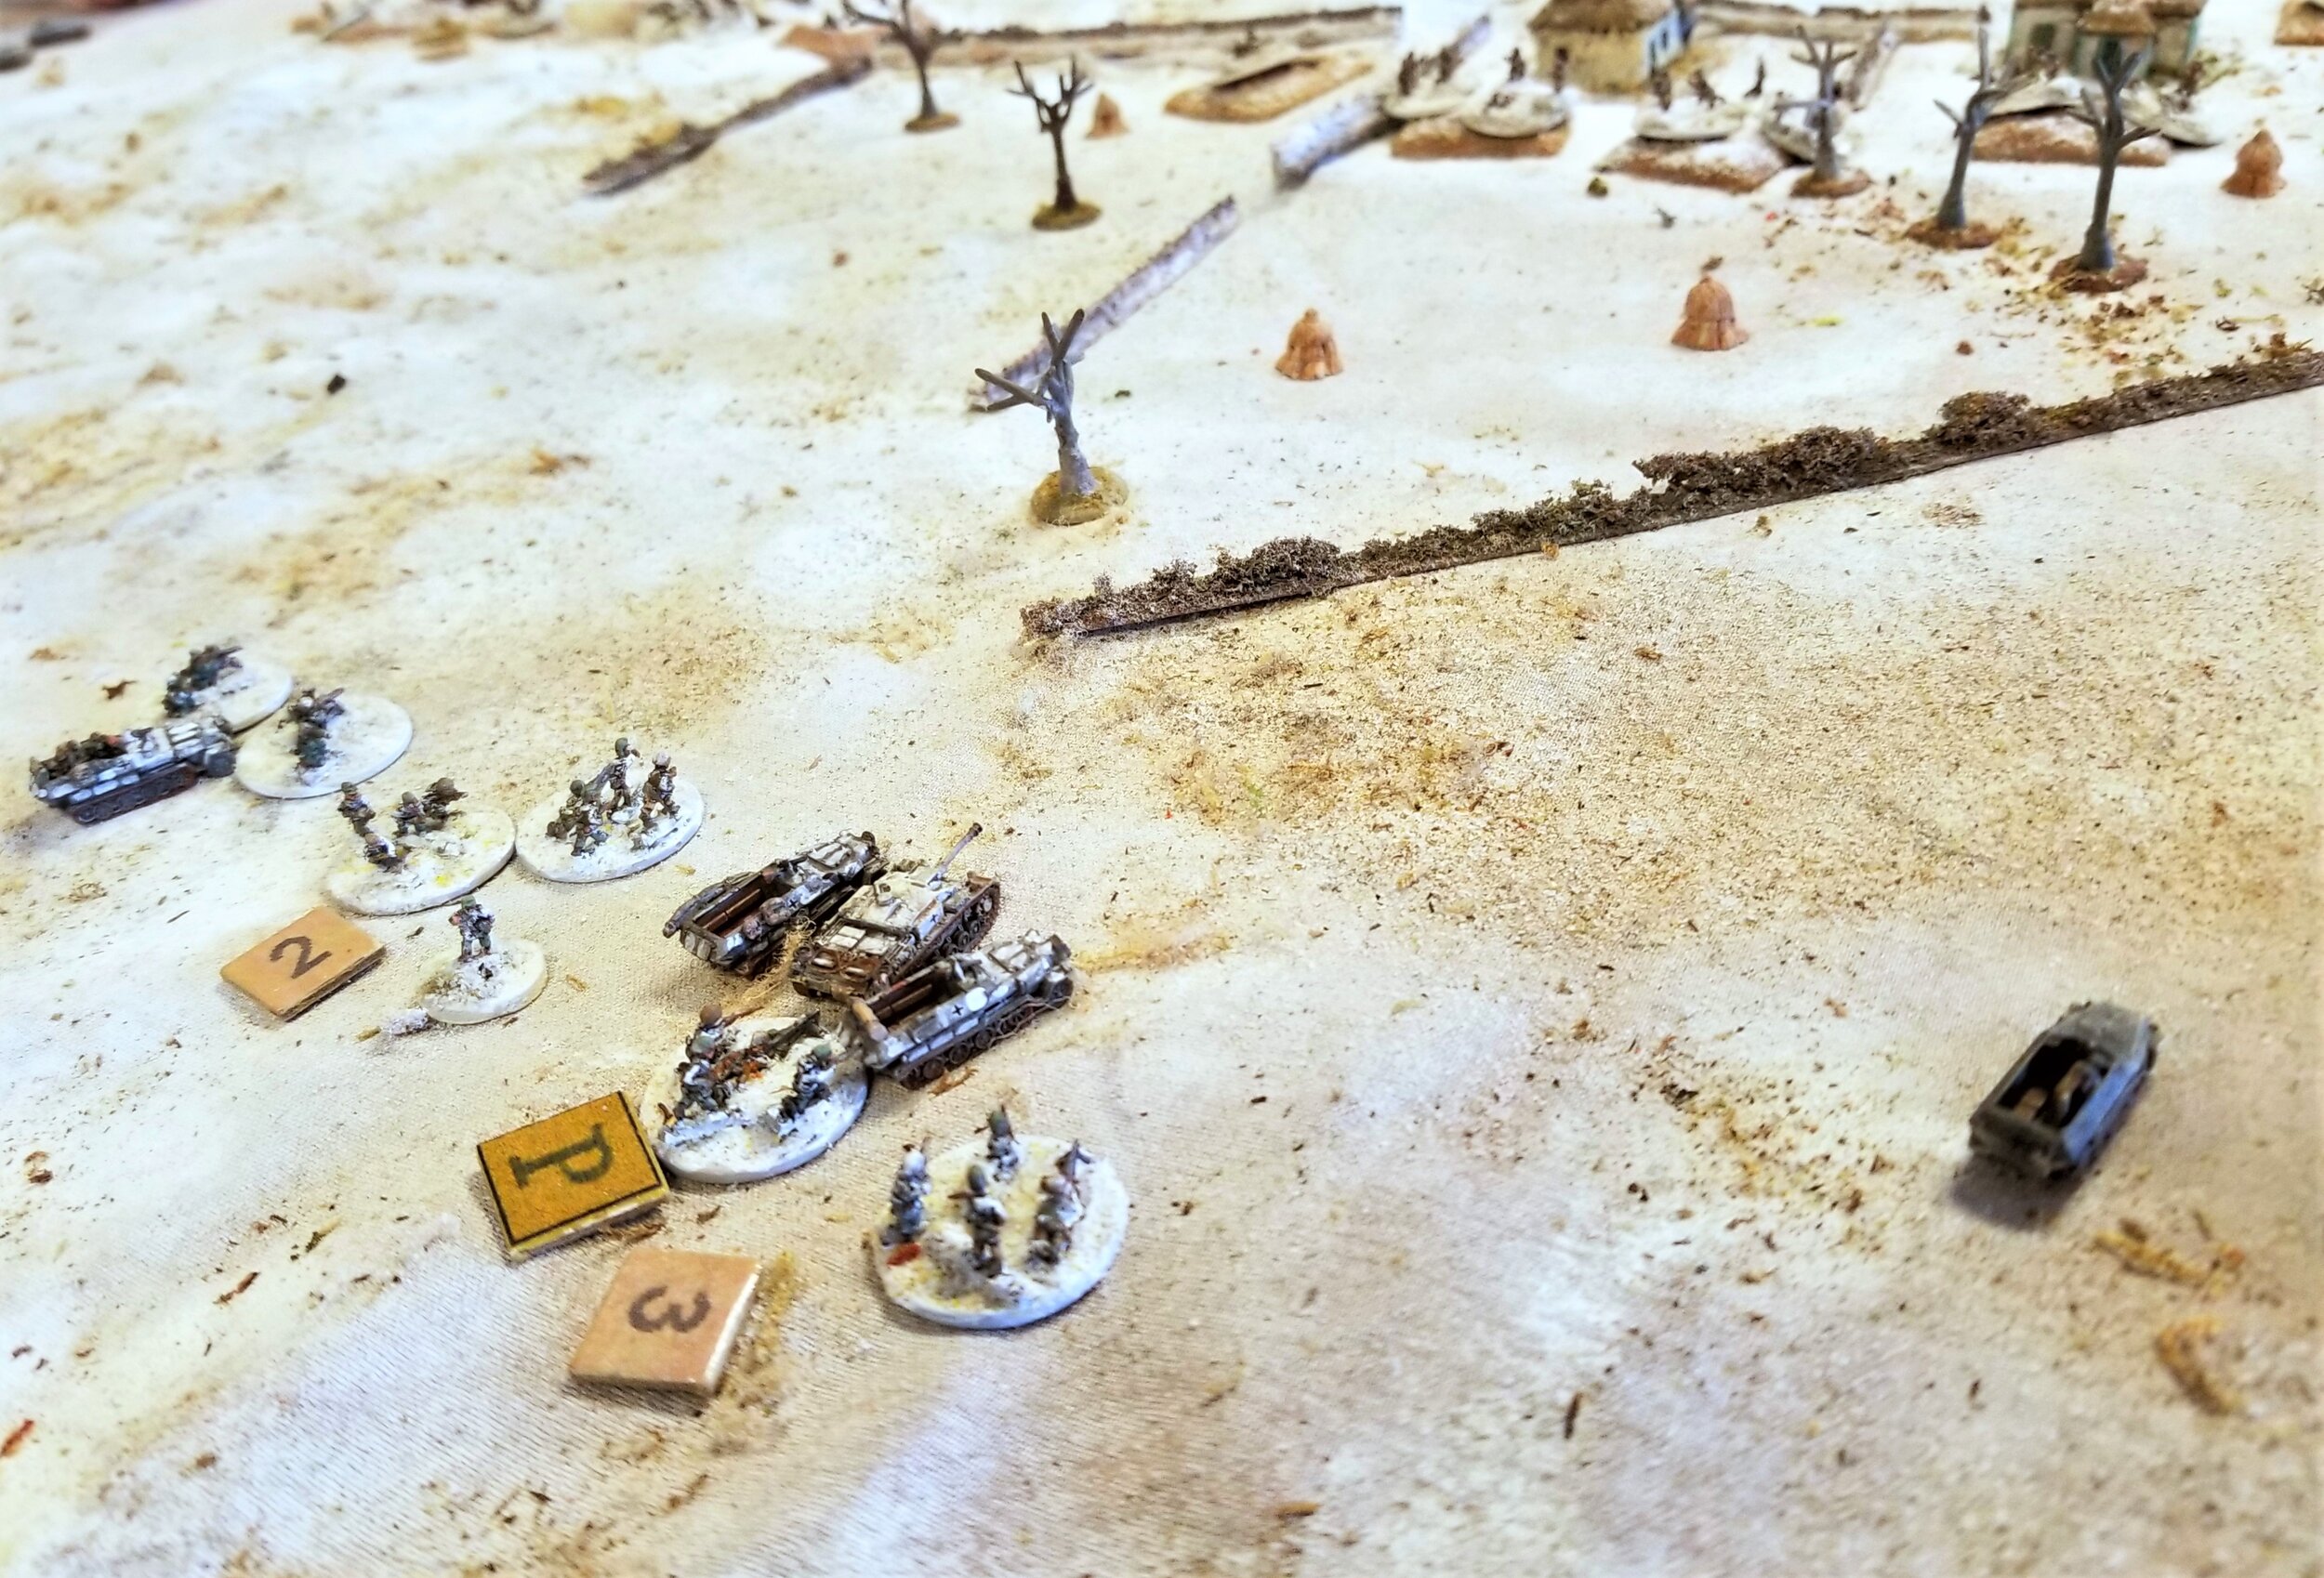 Panzergrenadiers dismount on the right